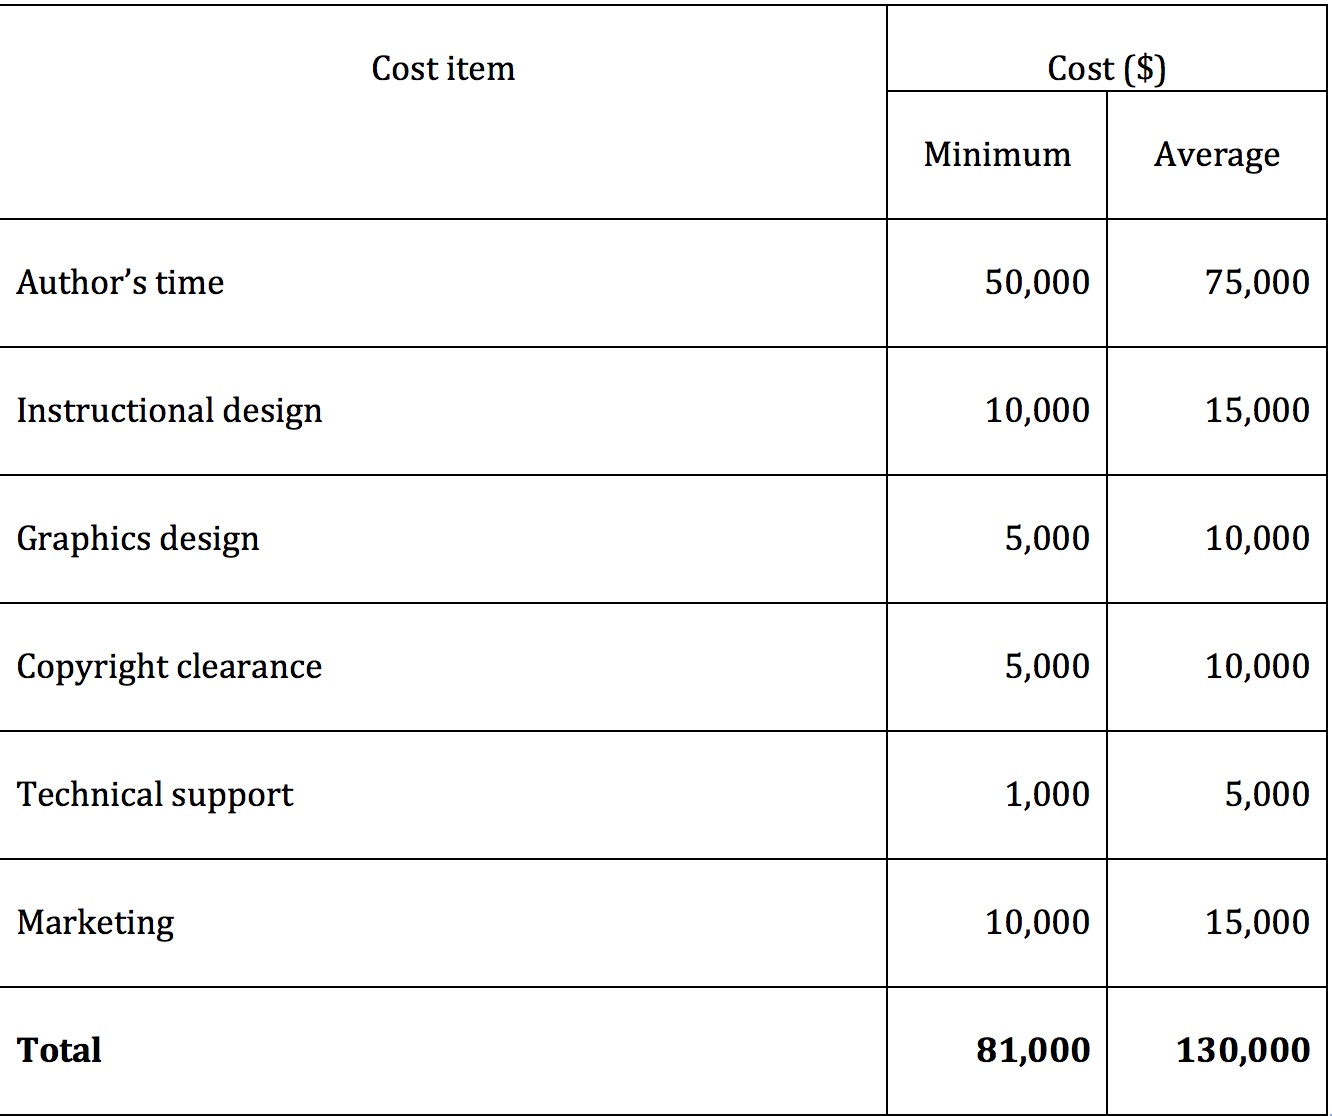 The cost of developing an open textbook: $80,000 \u2013 $130,000 | Tony Bates